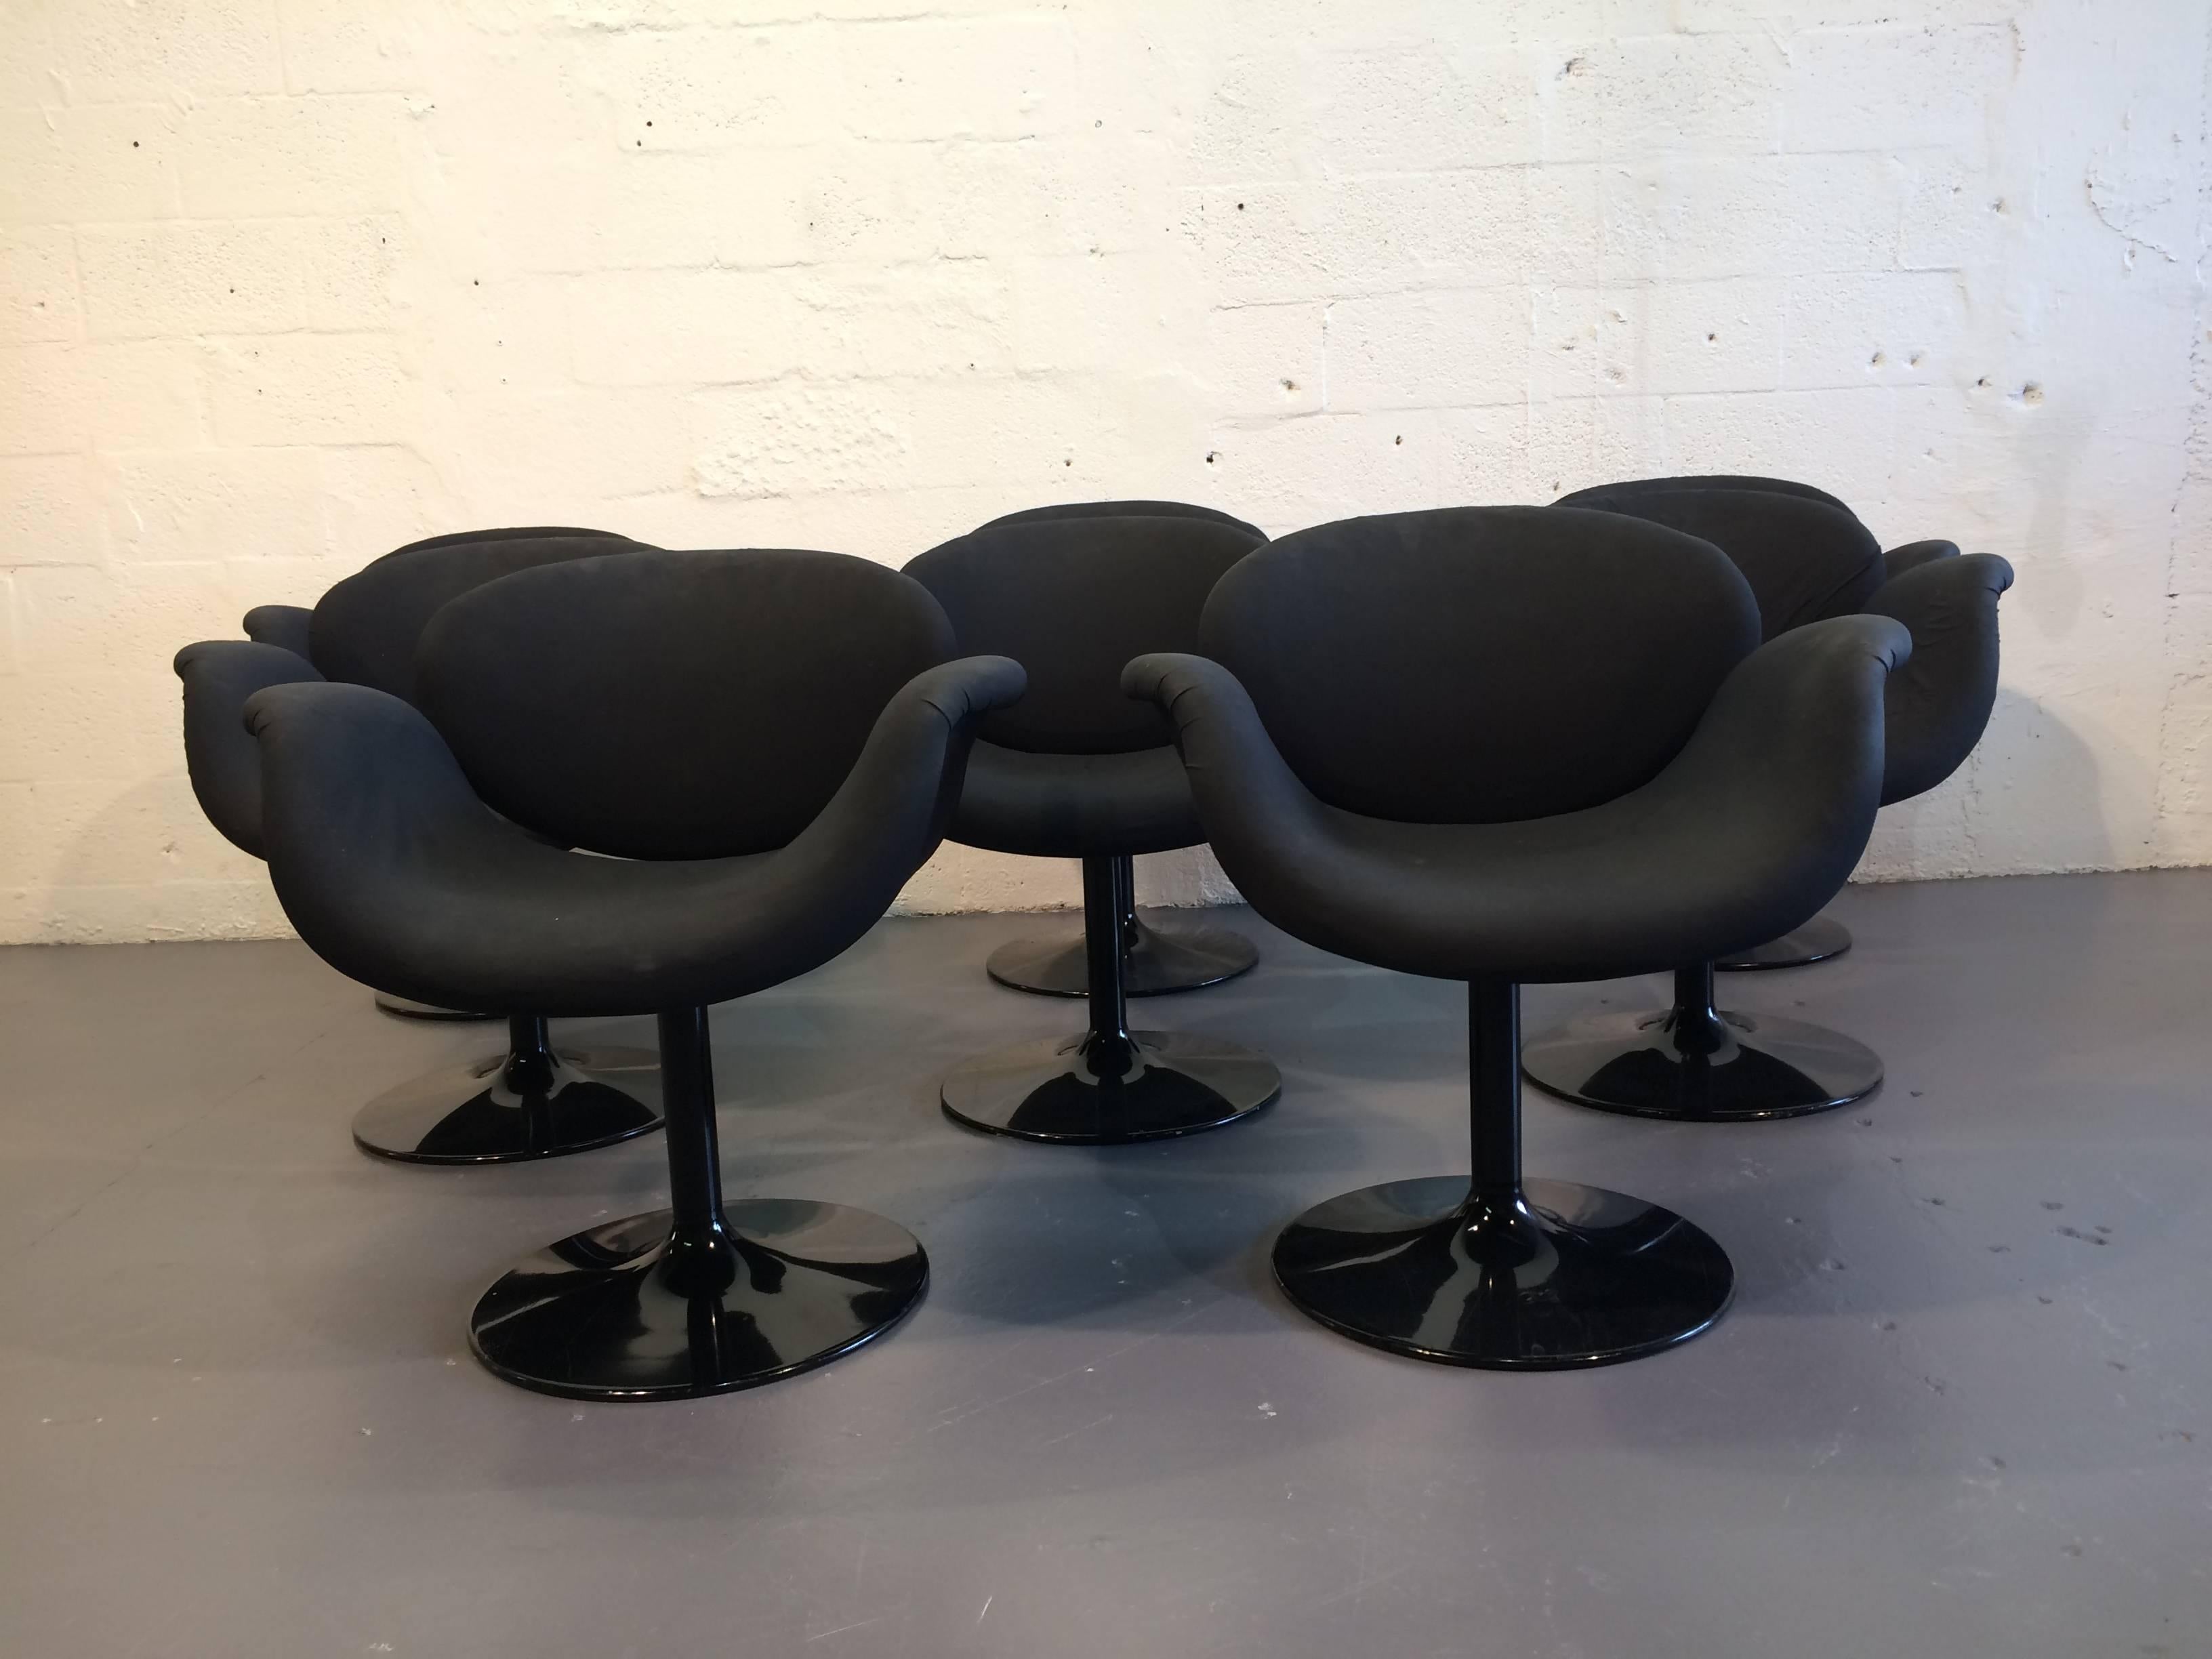 Rare set of eight tulip chairs designed by Pierre Paulin and made by Artifort. The chairs swivel.